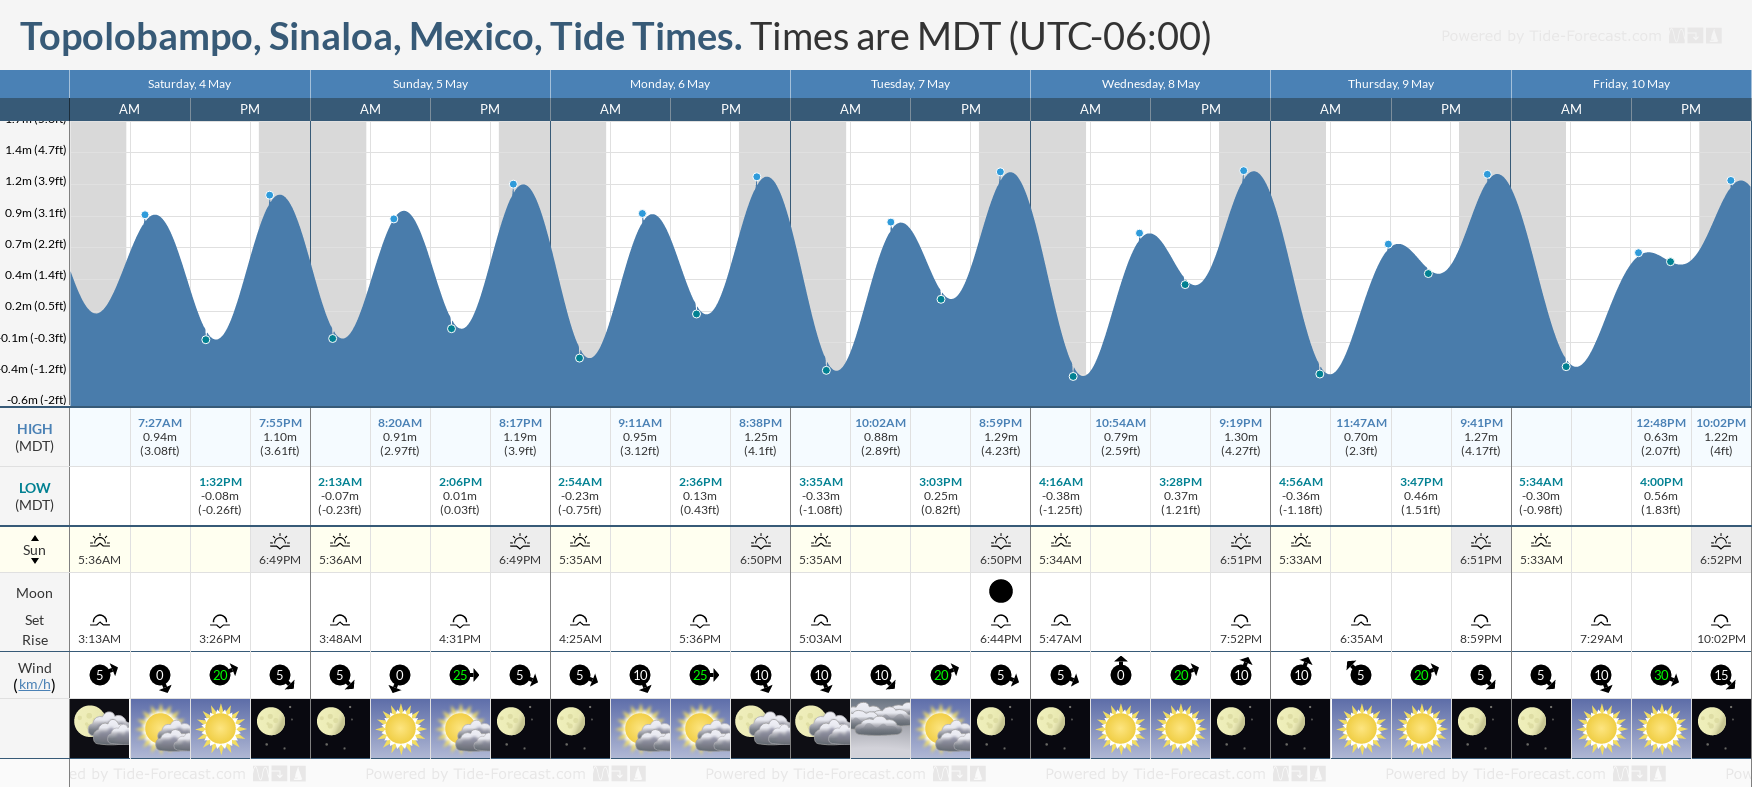 Topolobampo, Sinaloa, Mexico Tide Chart including high and low tide tide times for the next 7 days